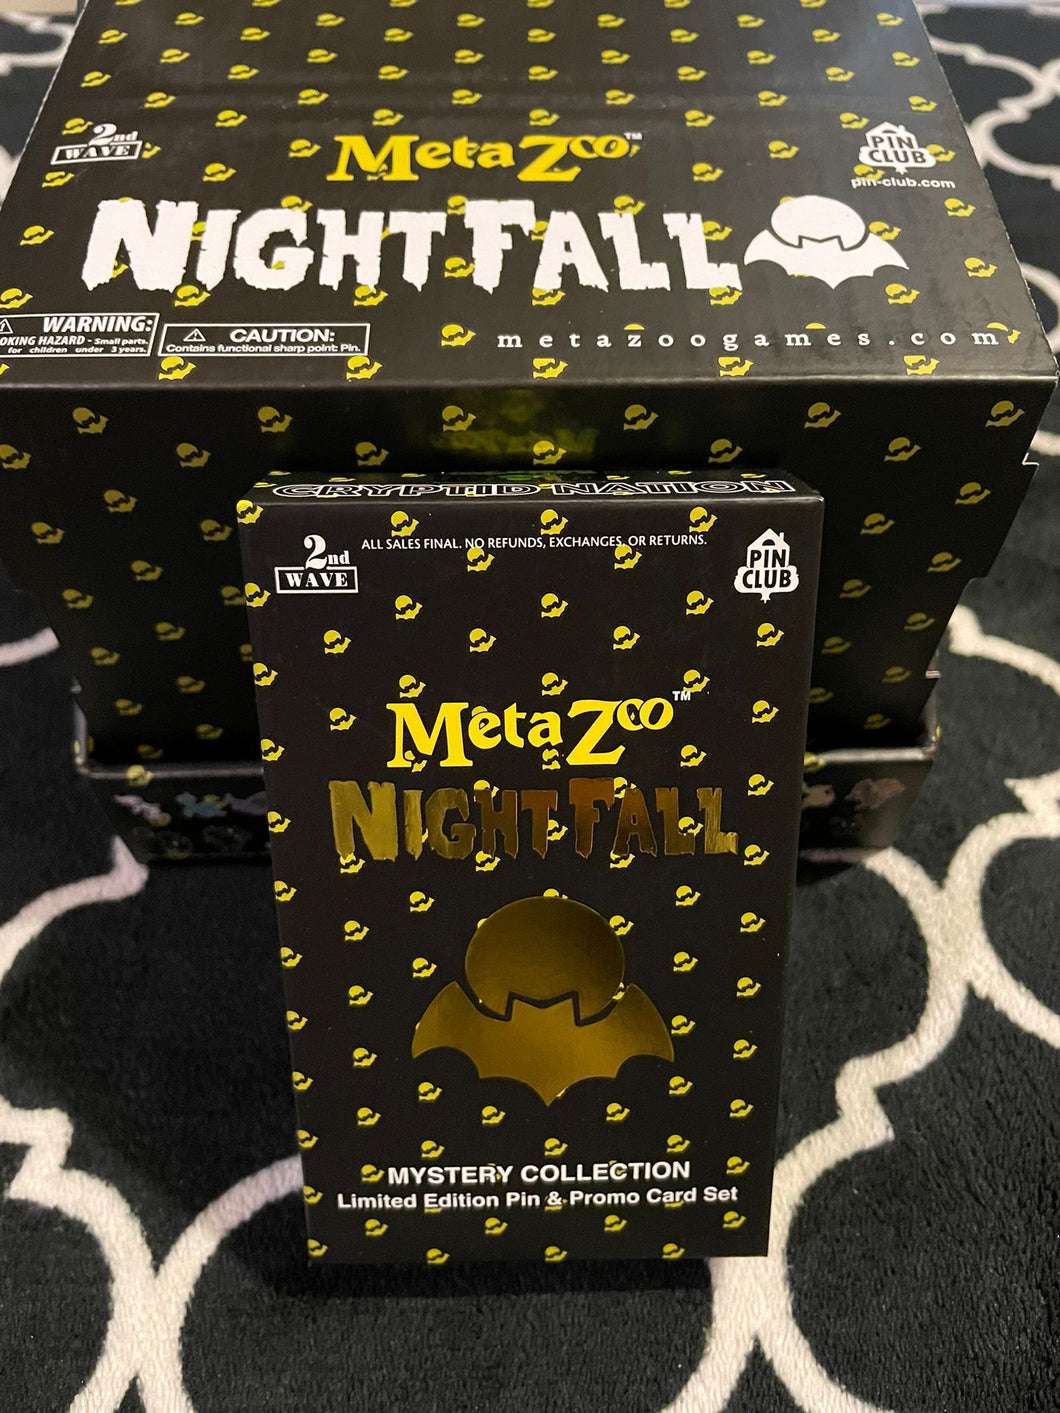 MetaZoo Nightfall X Pin Club 2nd Edition (2nd Wave) Factory-Sealed Mystery Collection Promo Box (In Stock)